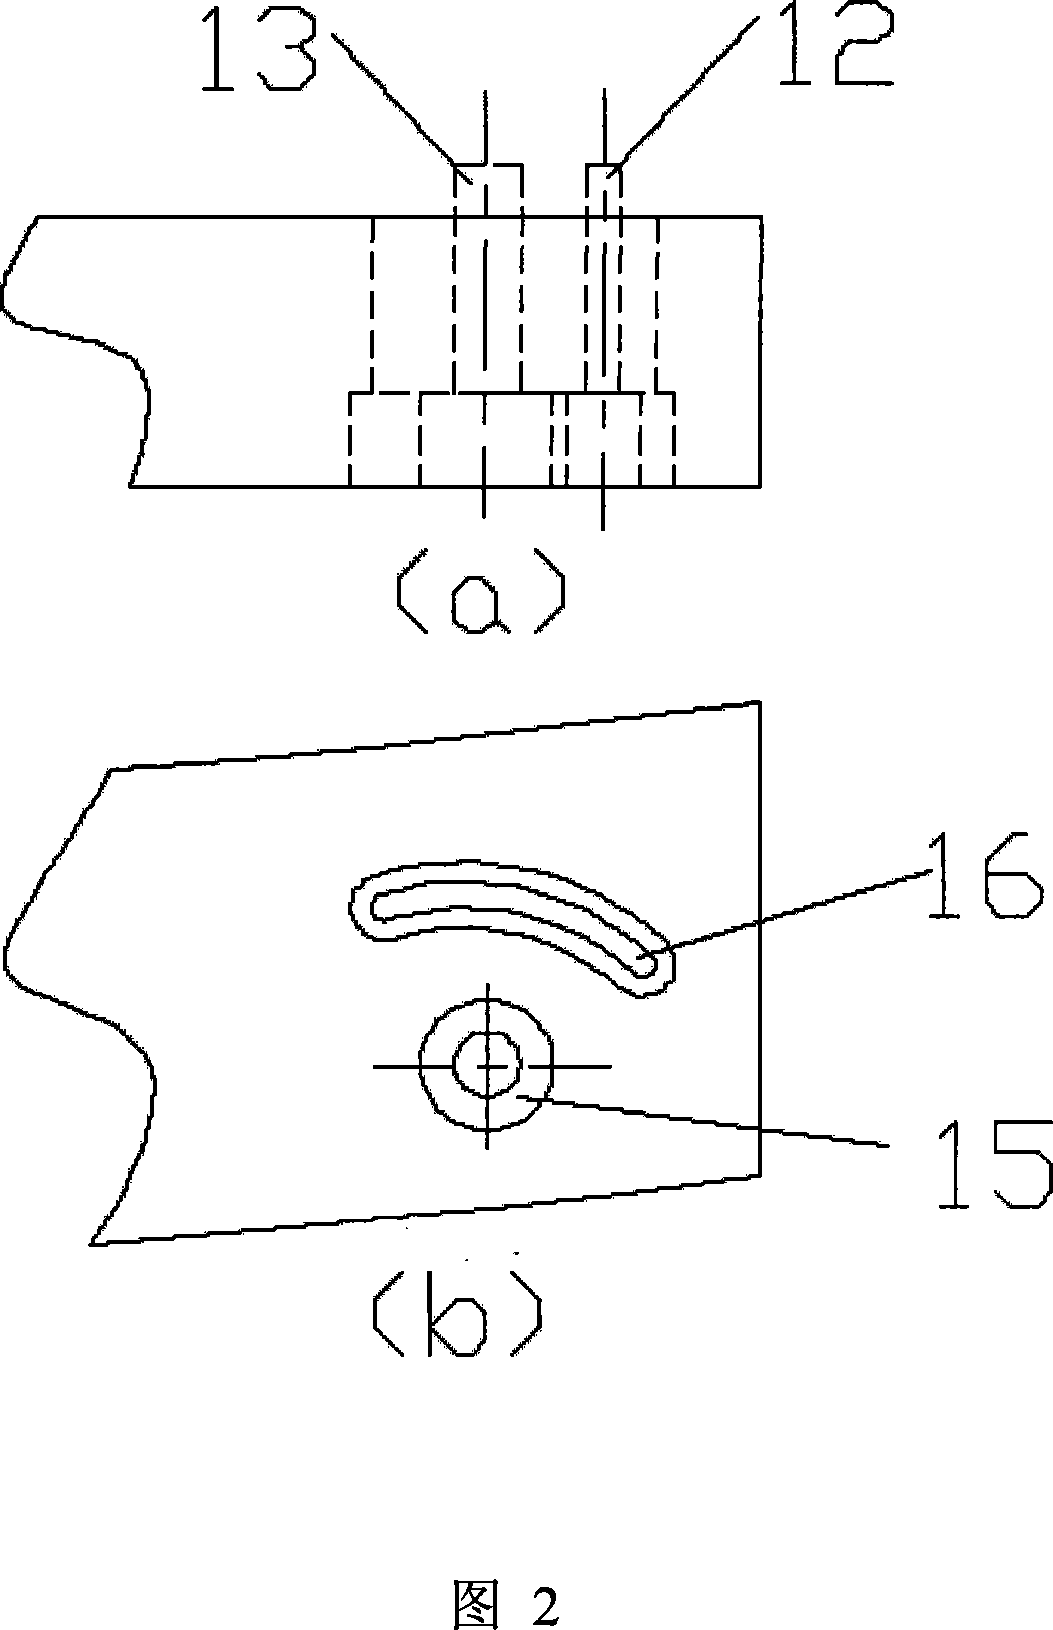 Face structure light scanning apparatus